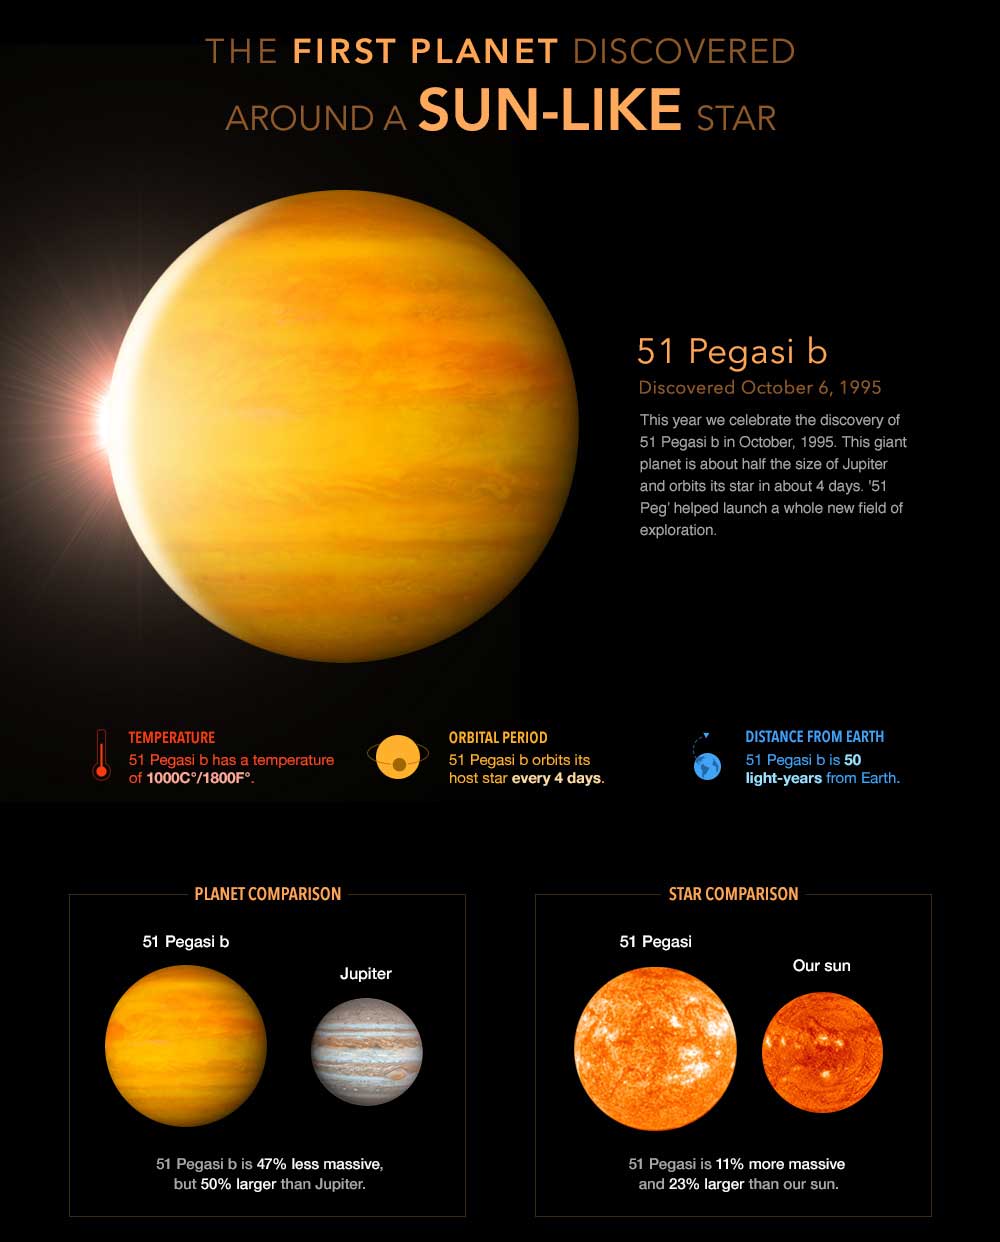 Infographic showing 51 Peg and its temperature and distance to its star compared to our Sun. It's 1,000 to 1,800 degrees F.